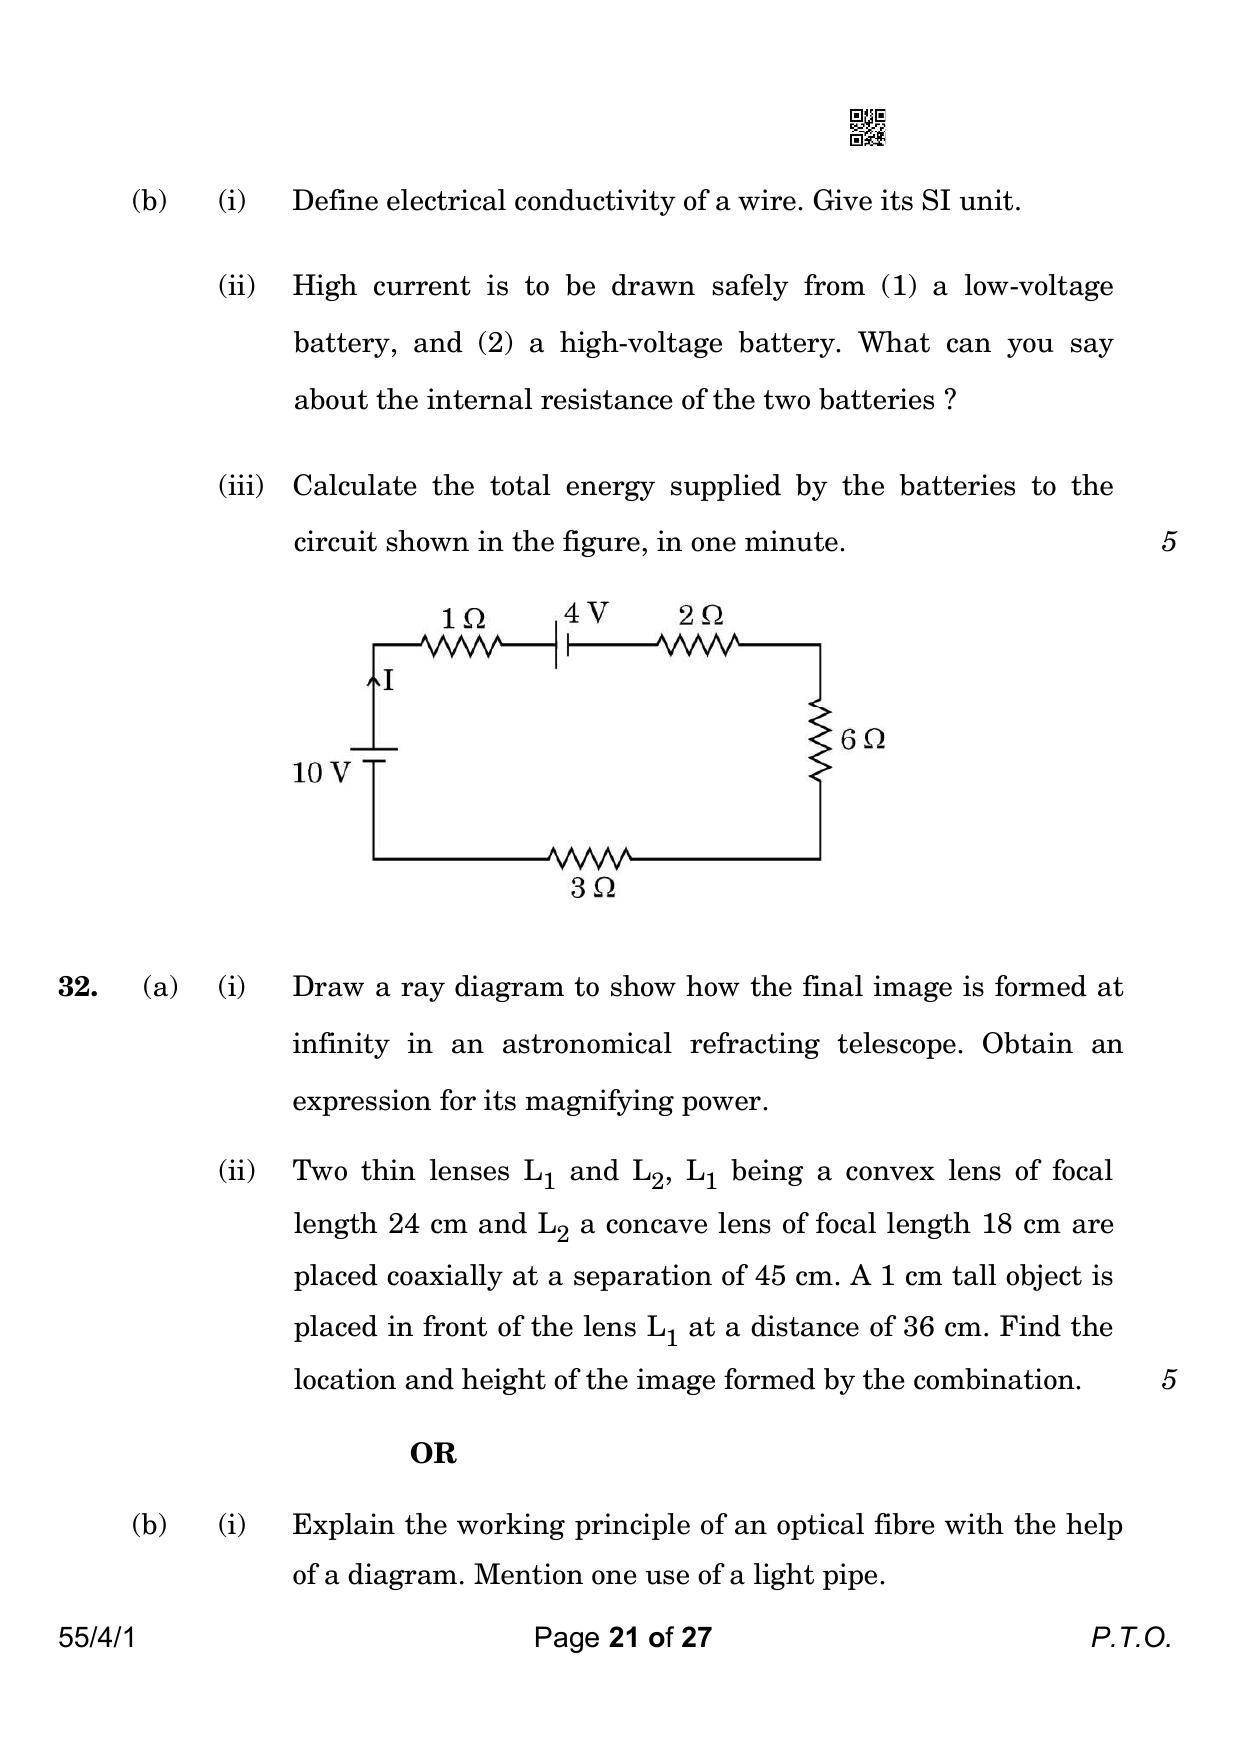 CBSE Class 12 55-4-1 Physics 2023 Question Paper - Page 21